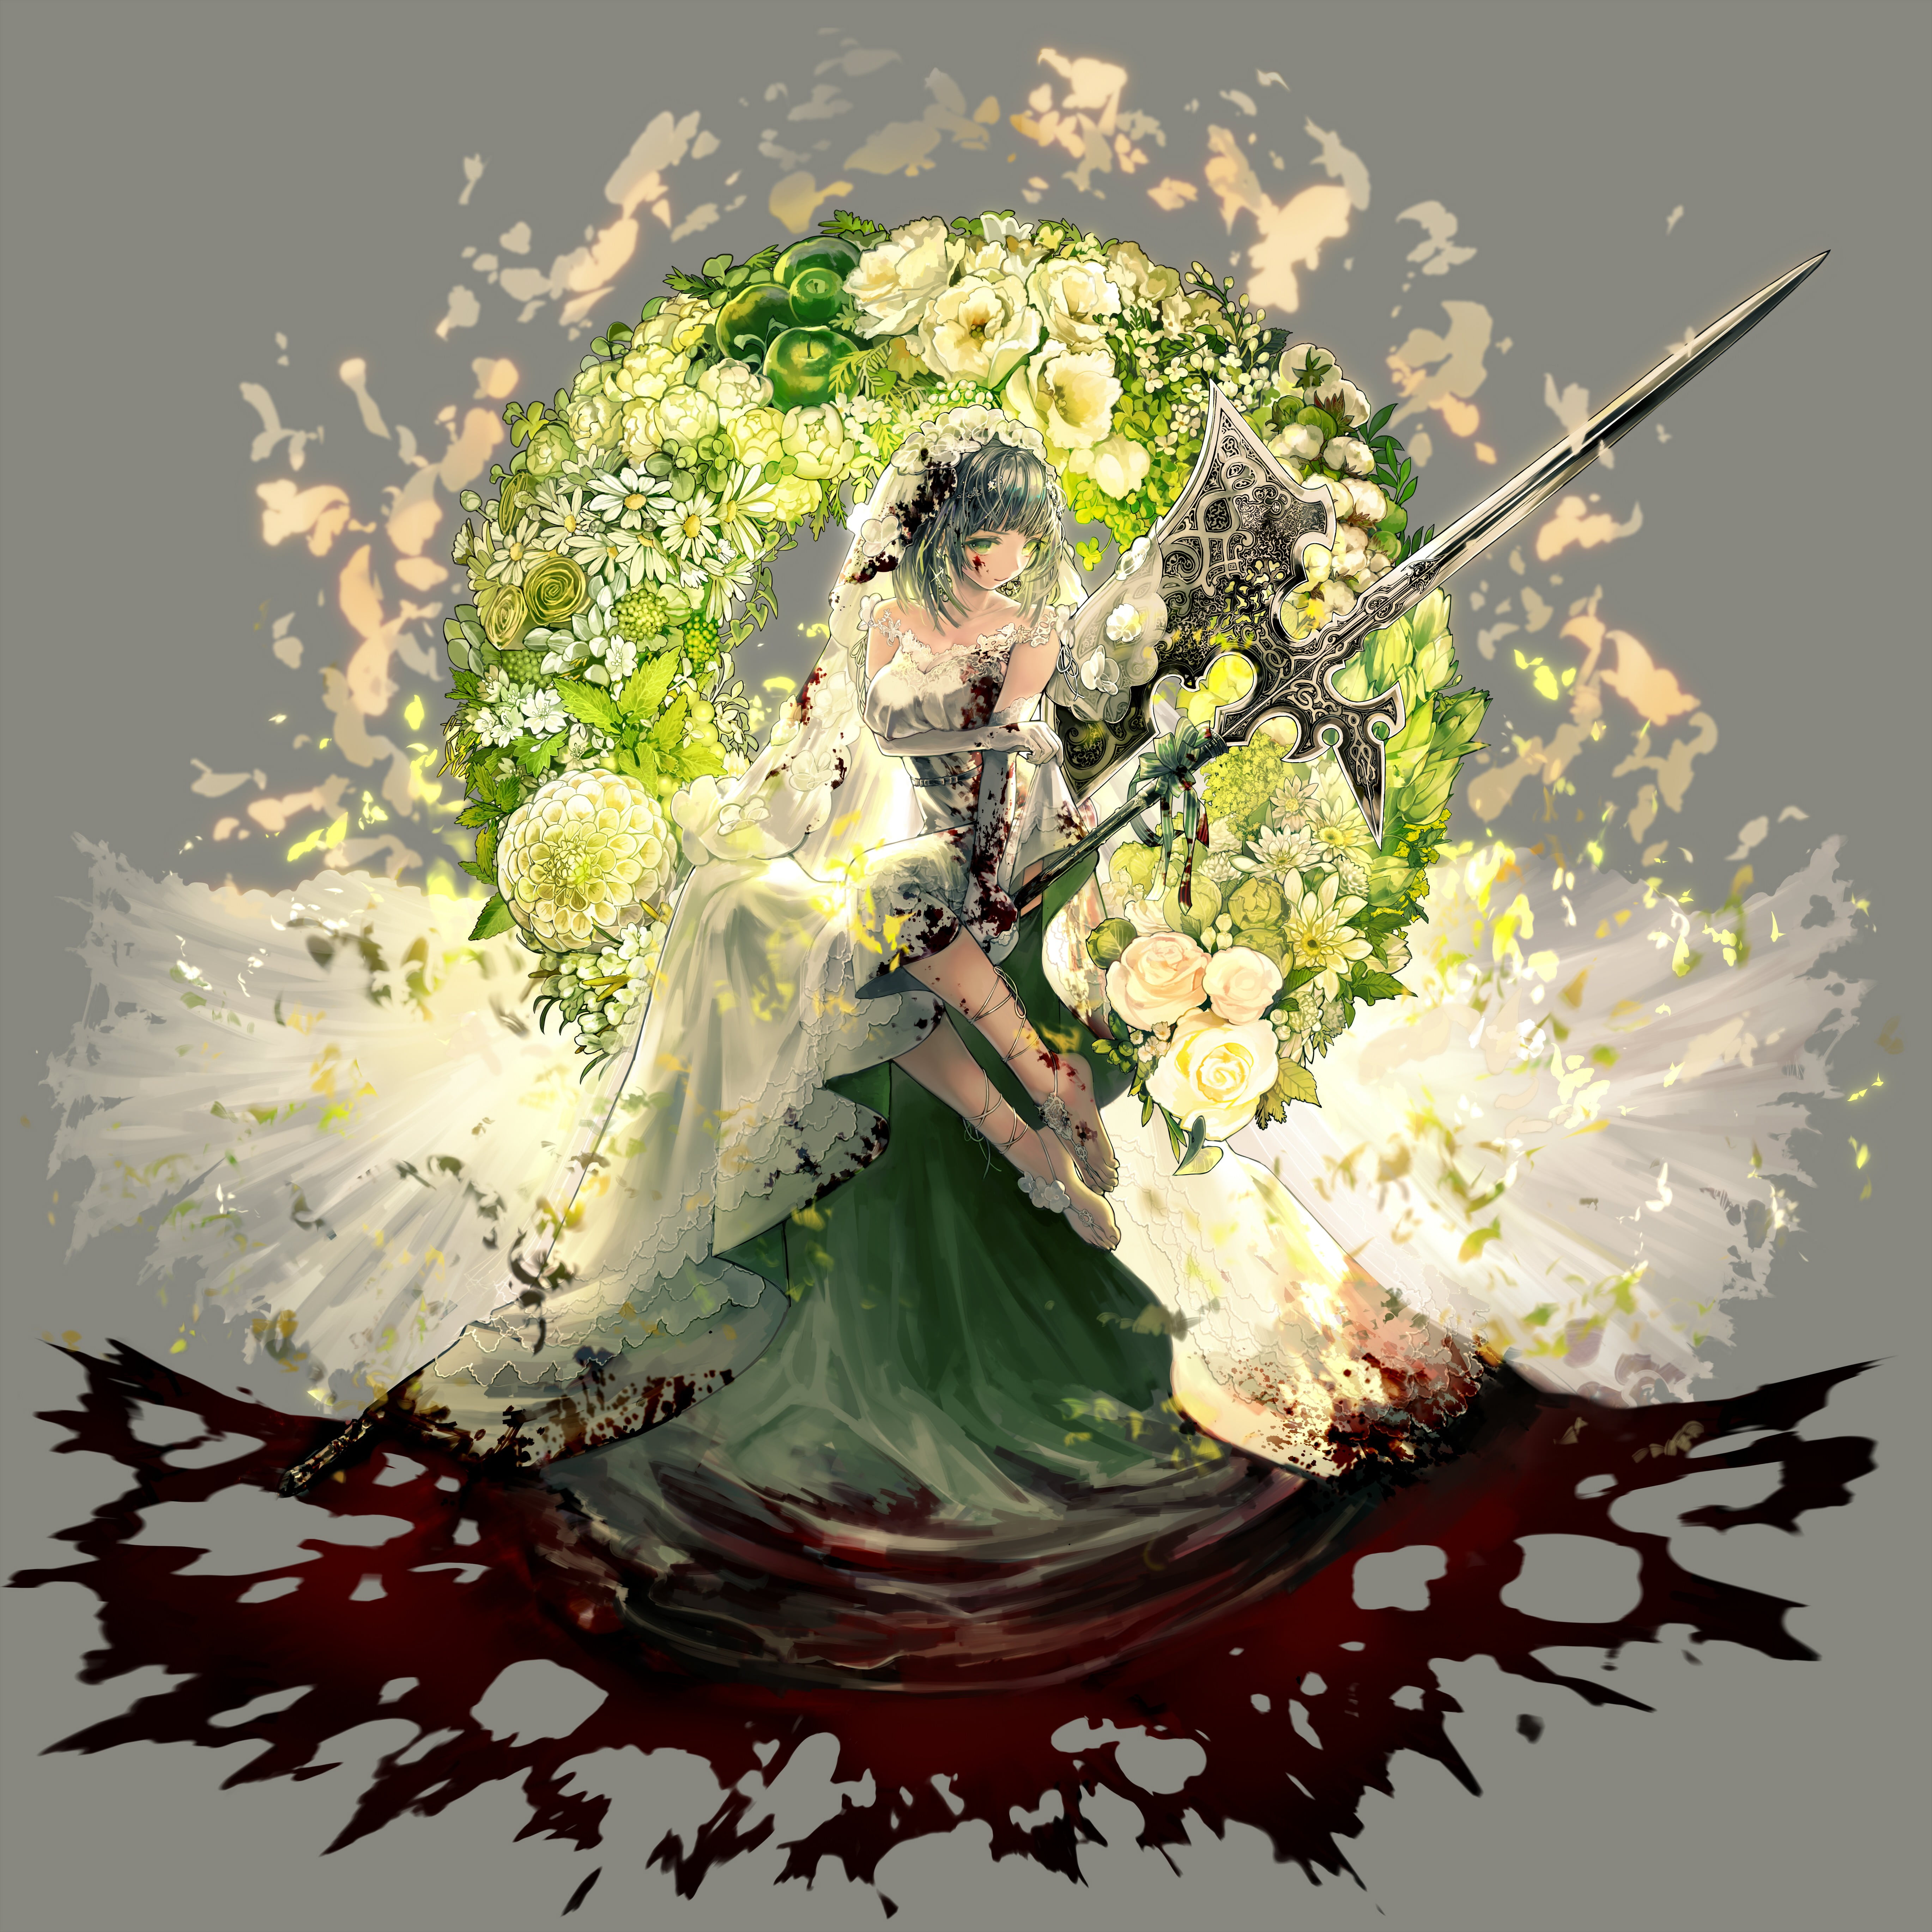 white and green flower wreath, blood, weapon, green dress, simple background